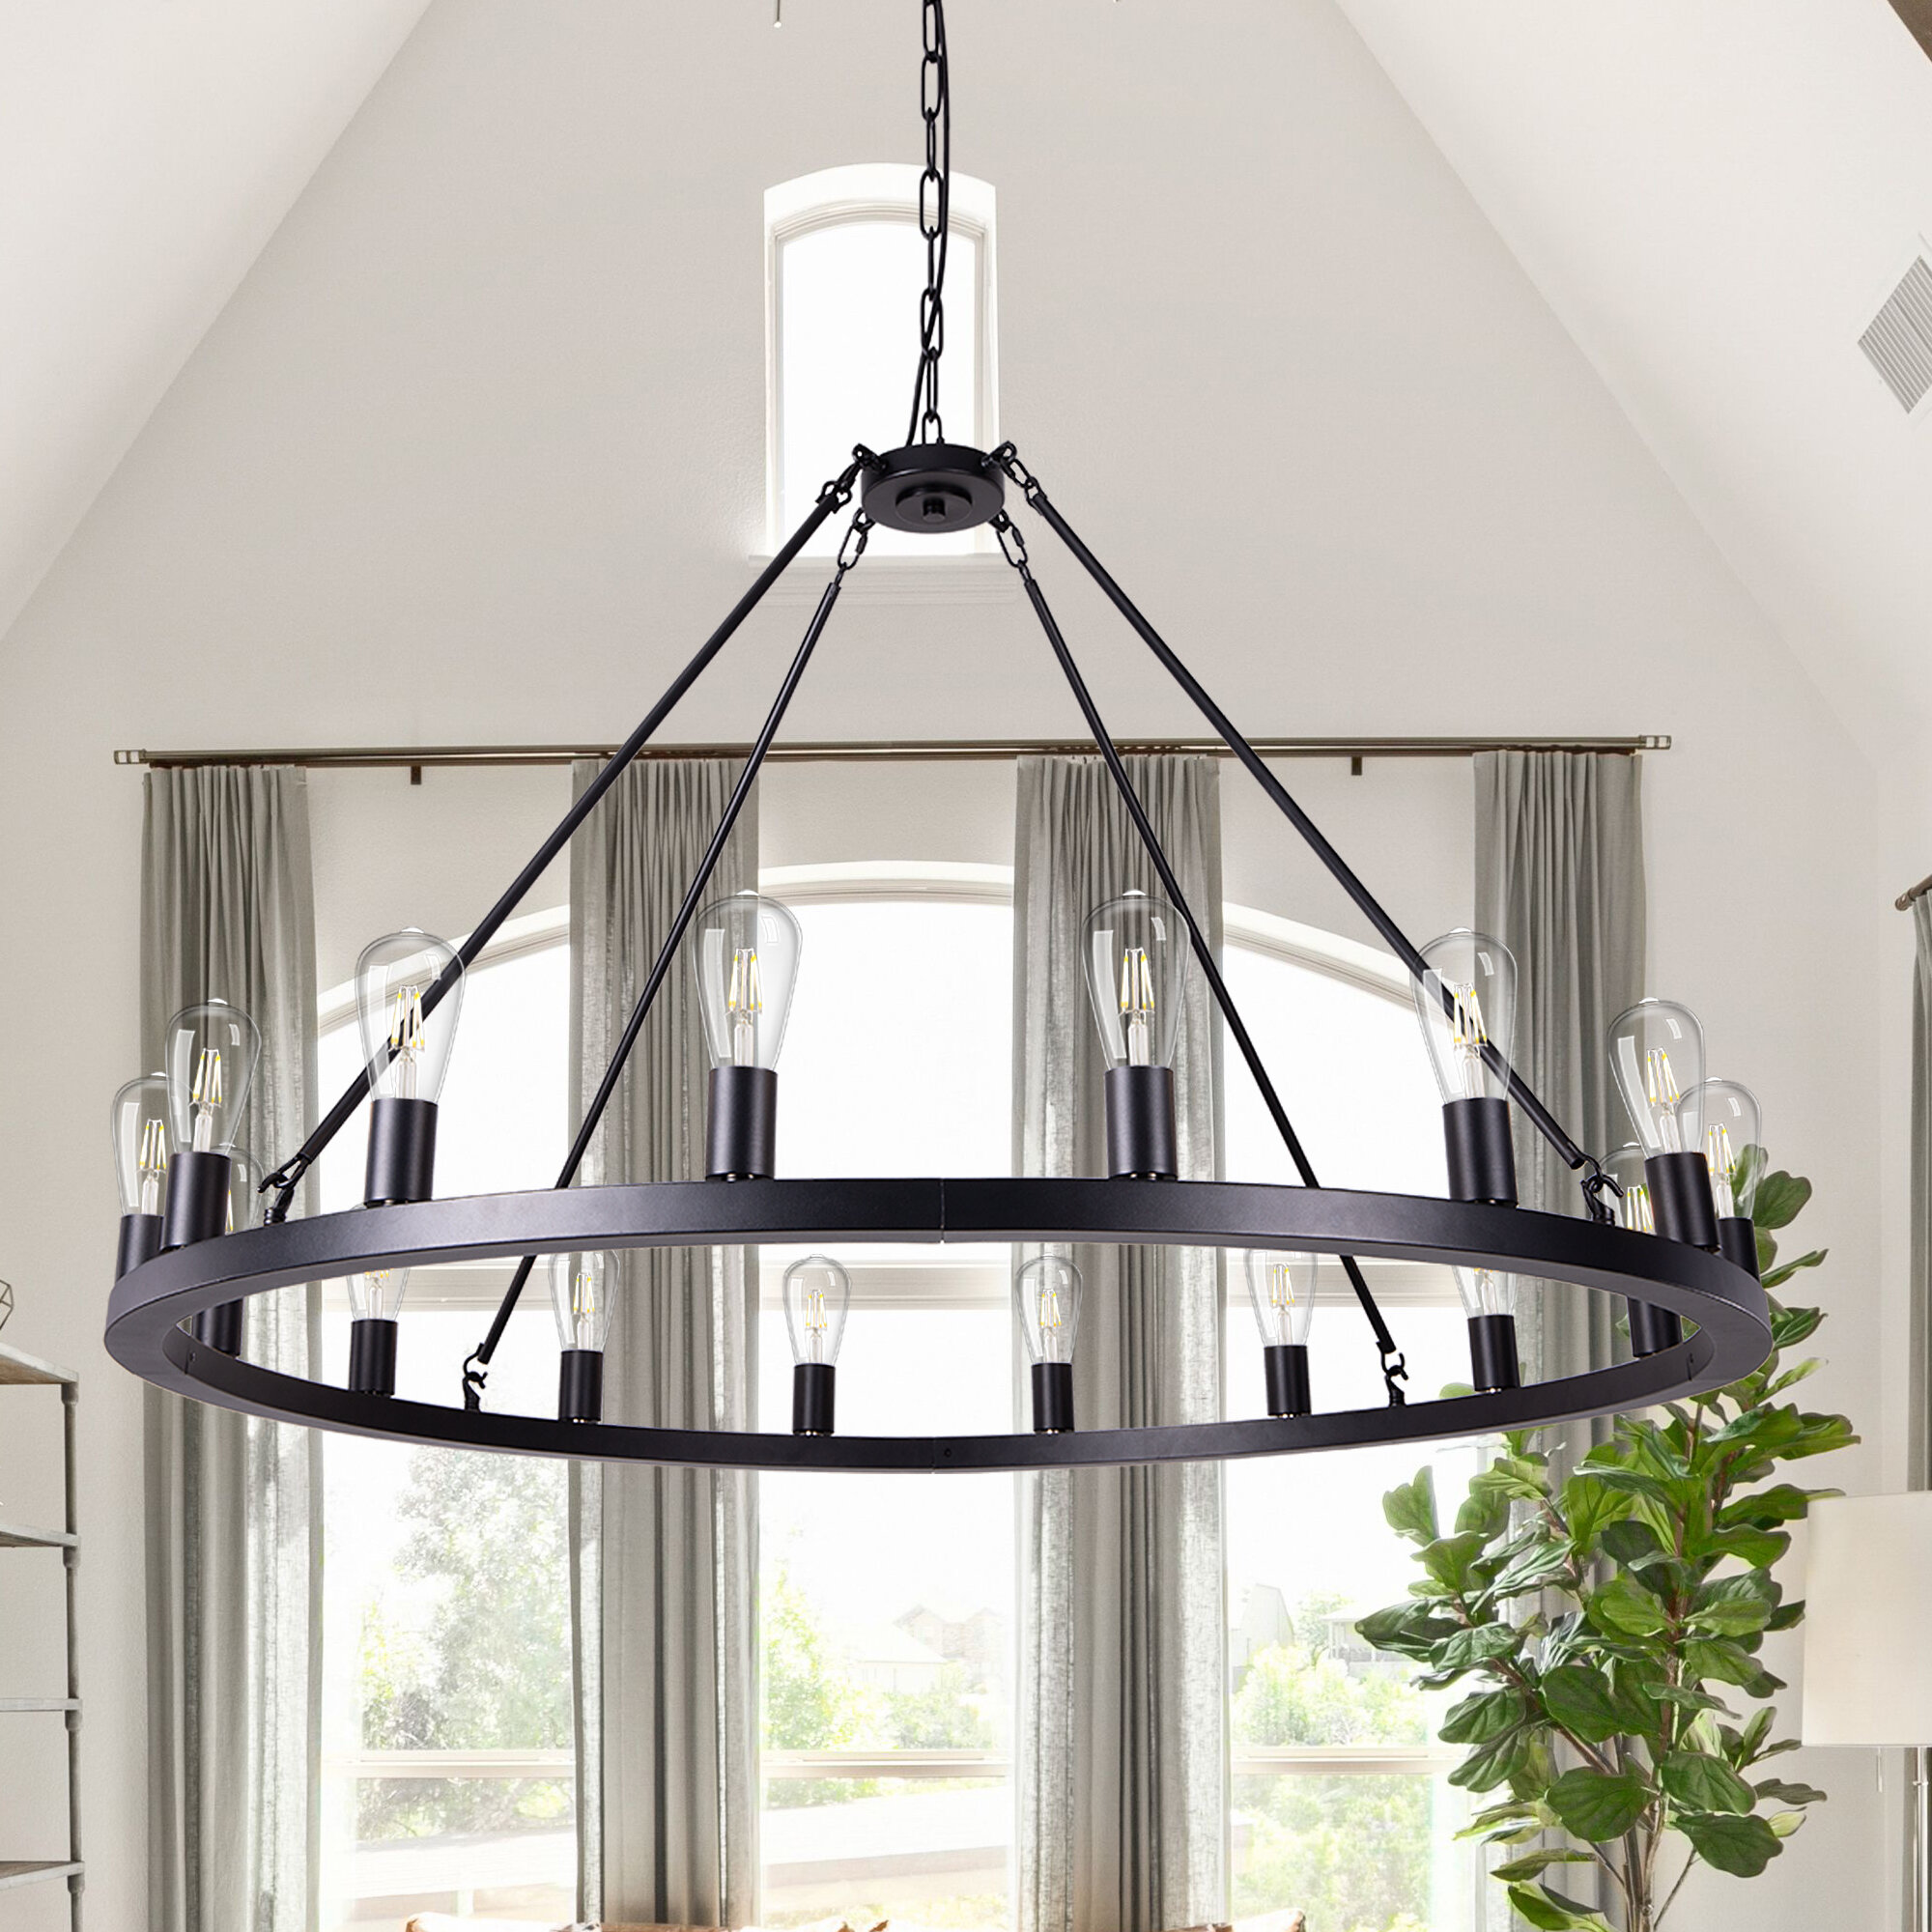 Kitchen Island Farmhouse Industrial Country Style Large Round Pendant Light Fixture for Dining Room Wellmet 12-Light Black Wagon Wheel Chandelier Diam 38 inch